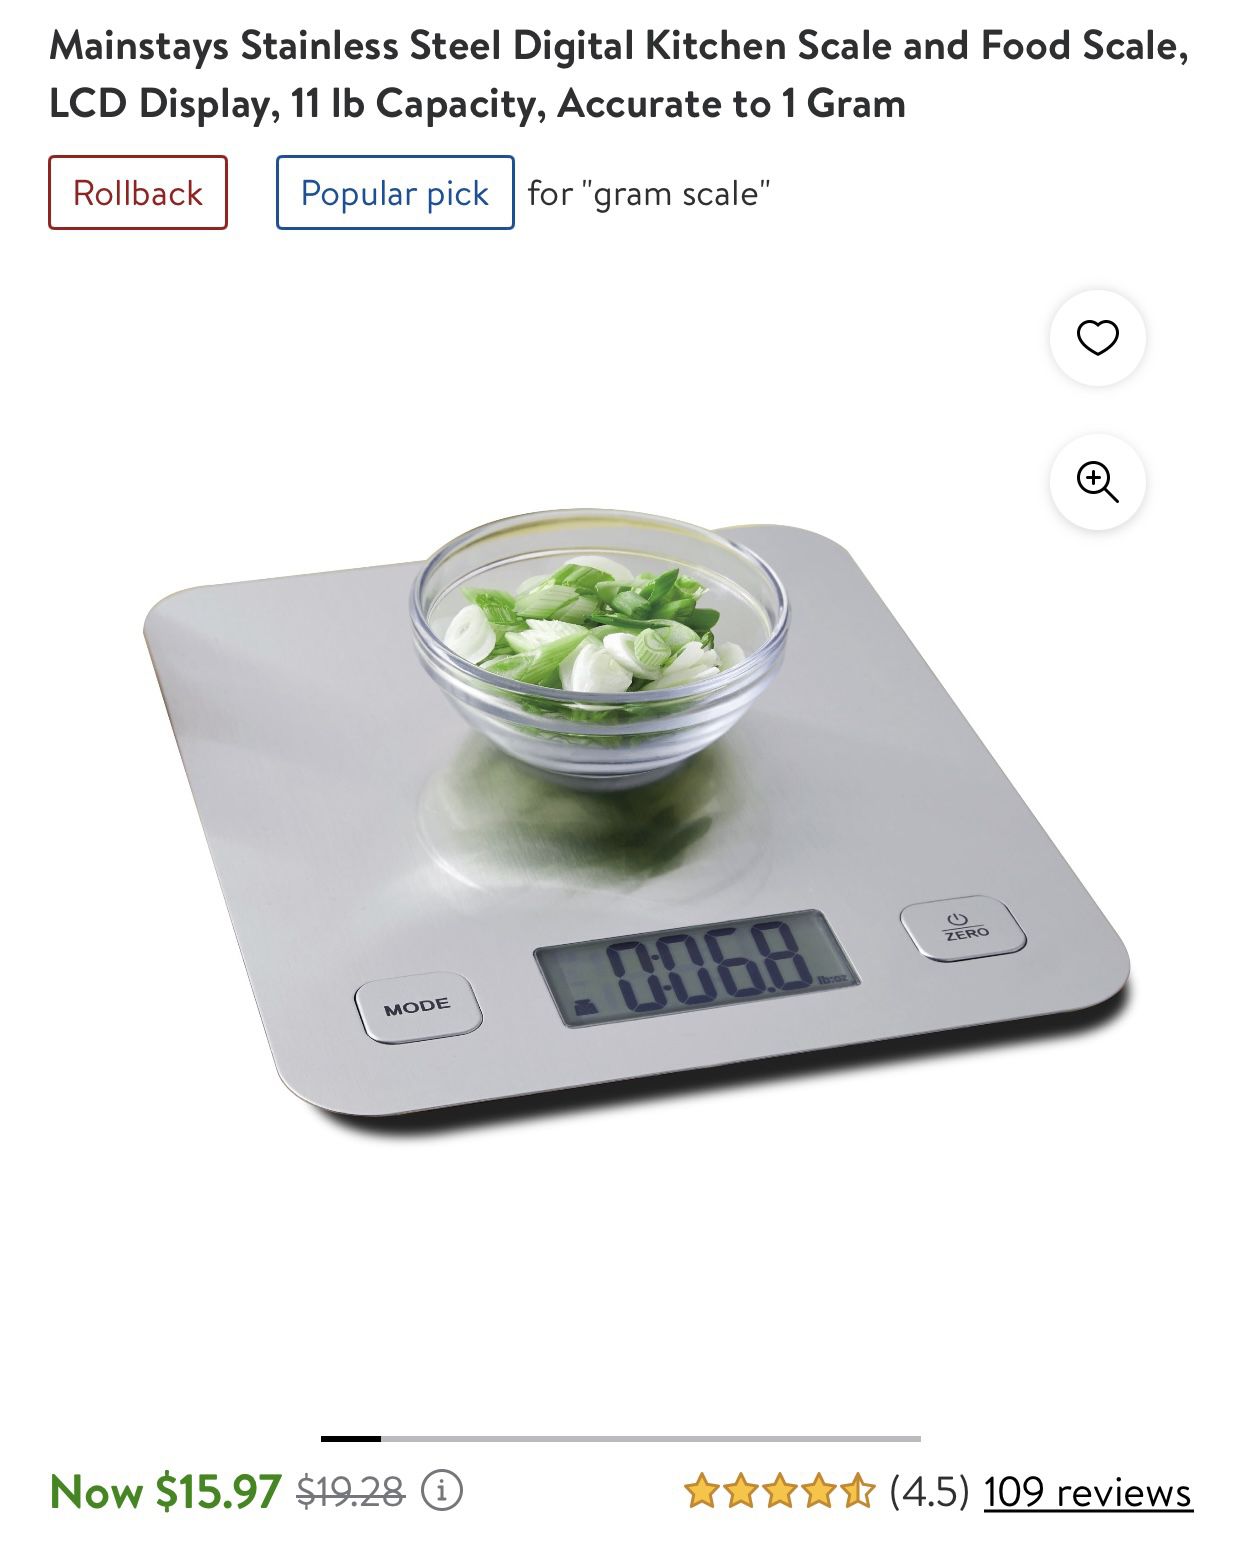 Mainstays Stainless Steel Digital Kitchen Scale and Food Scale, LCD Display, 11 lb Capacity, Accurate to 1 Gram